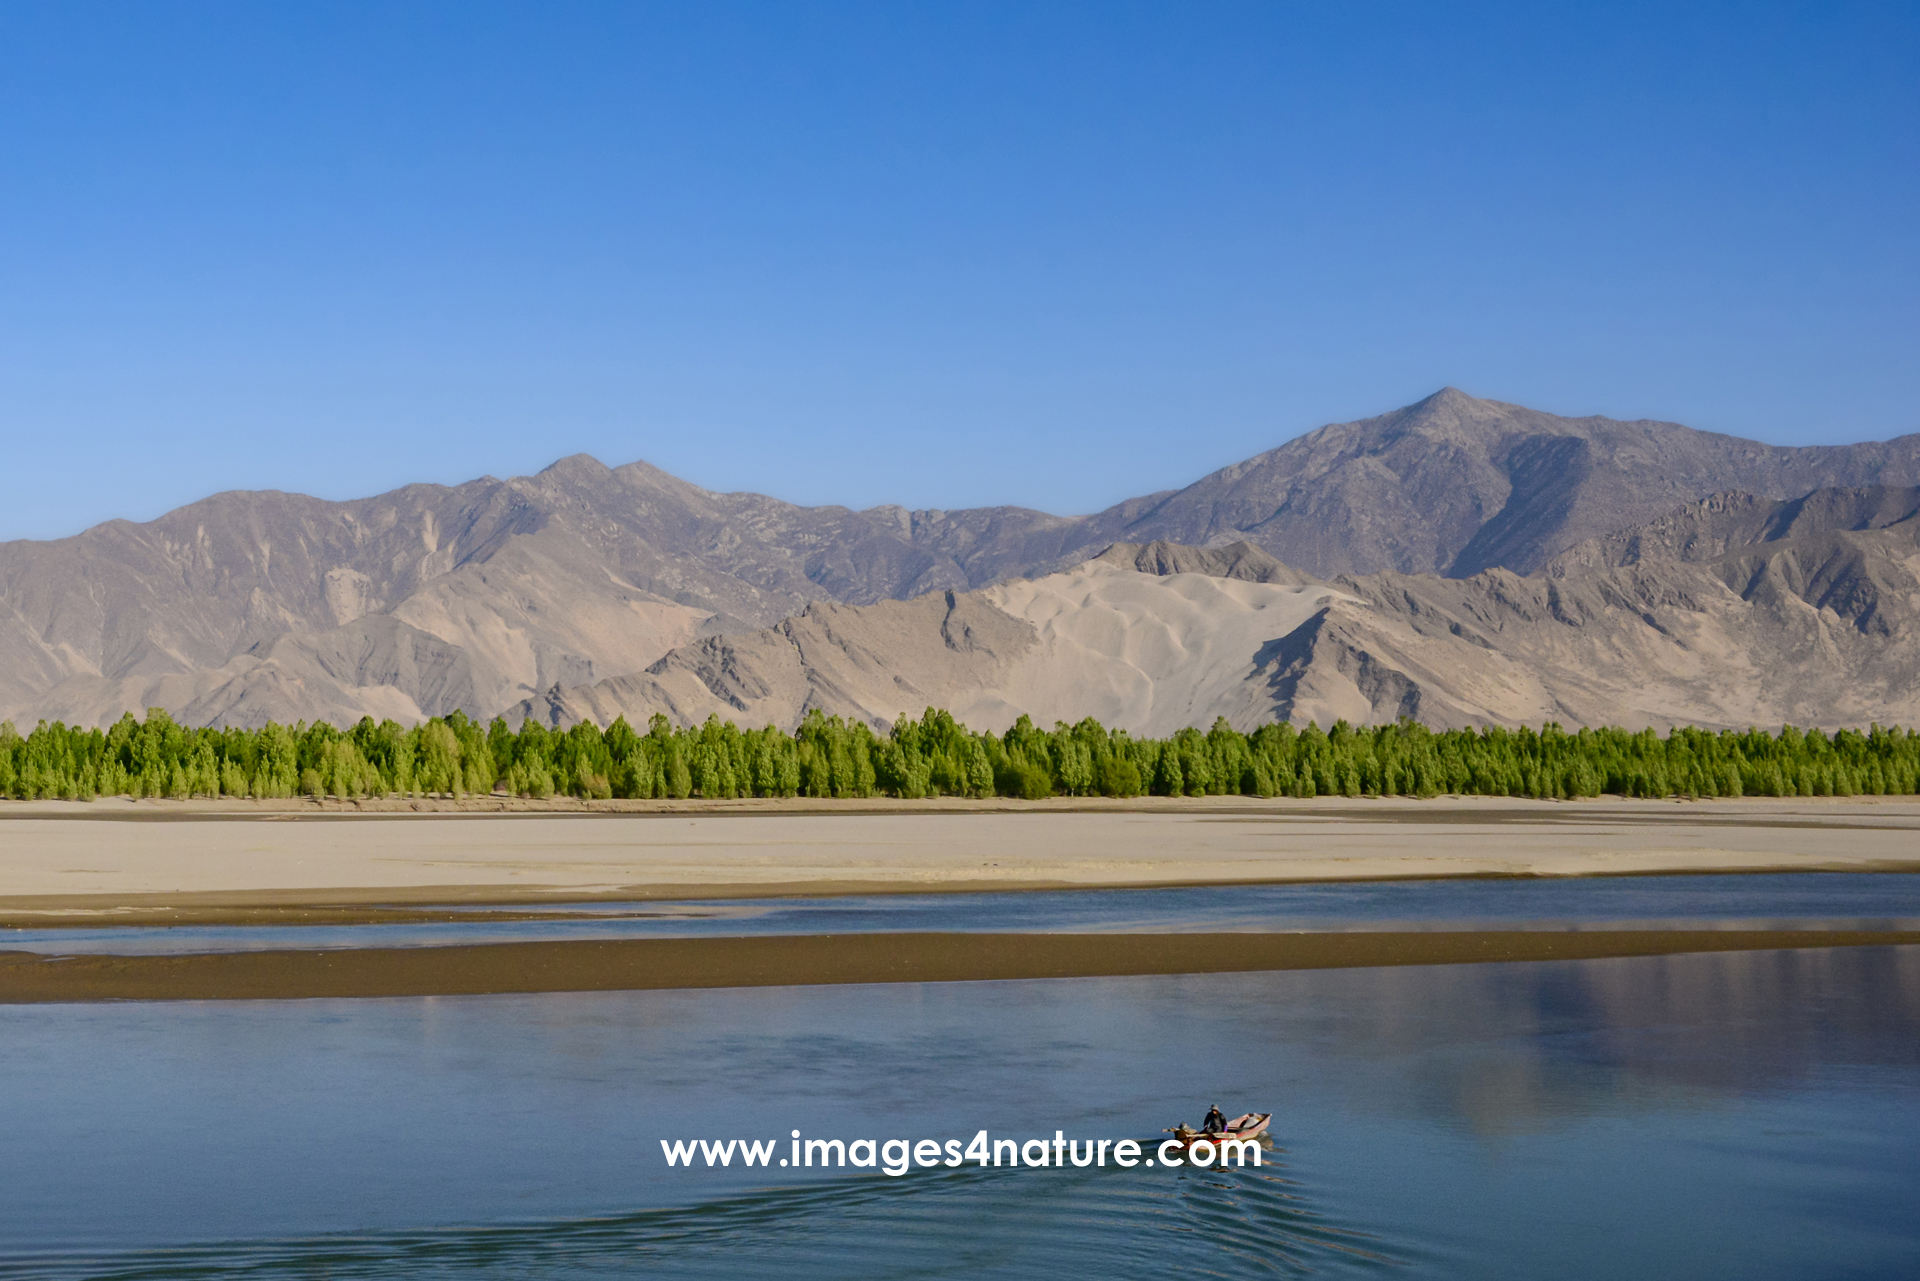 A small boat crossing the Yarlung Zangbo River with fresh green trees on the riverbank